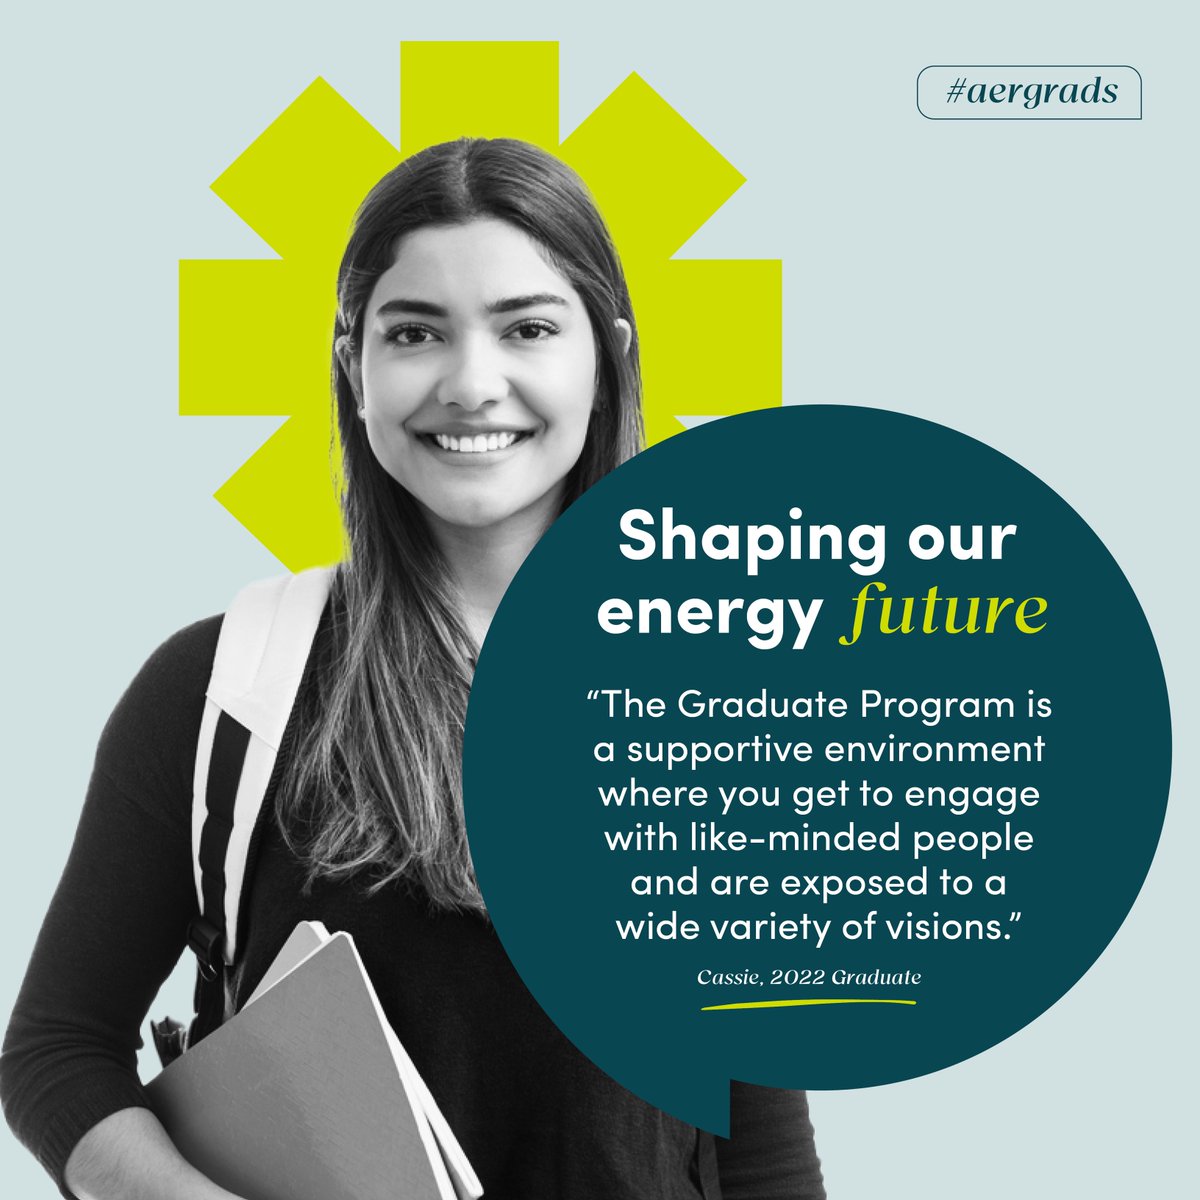 Put yourself at the heart of shaping Australia's energy future and join the AER's 2025 Graduate Program! ⚡ Find out more: lnkd.in/gPswNn9a

#GraduateJobs #APSJobs #PublicService #Employment #GradProgram #WeAreAER #AERgrads